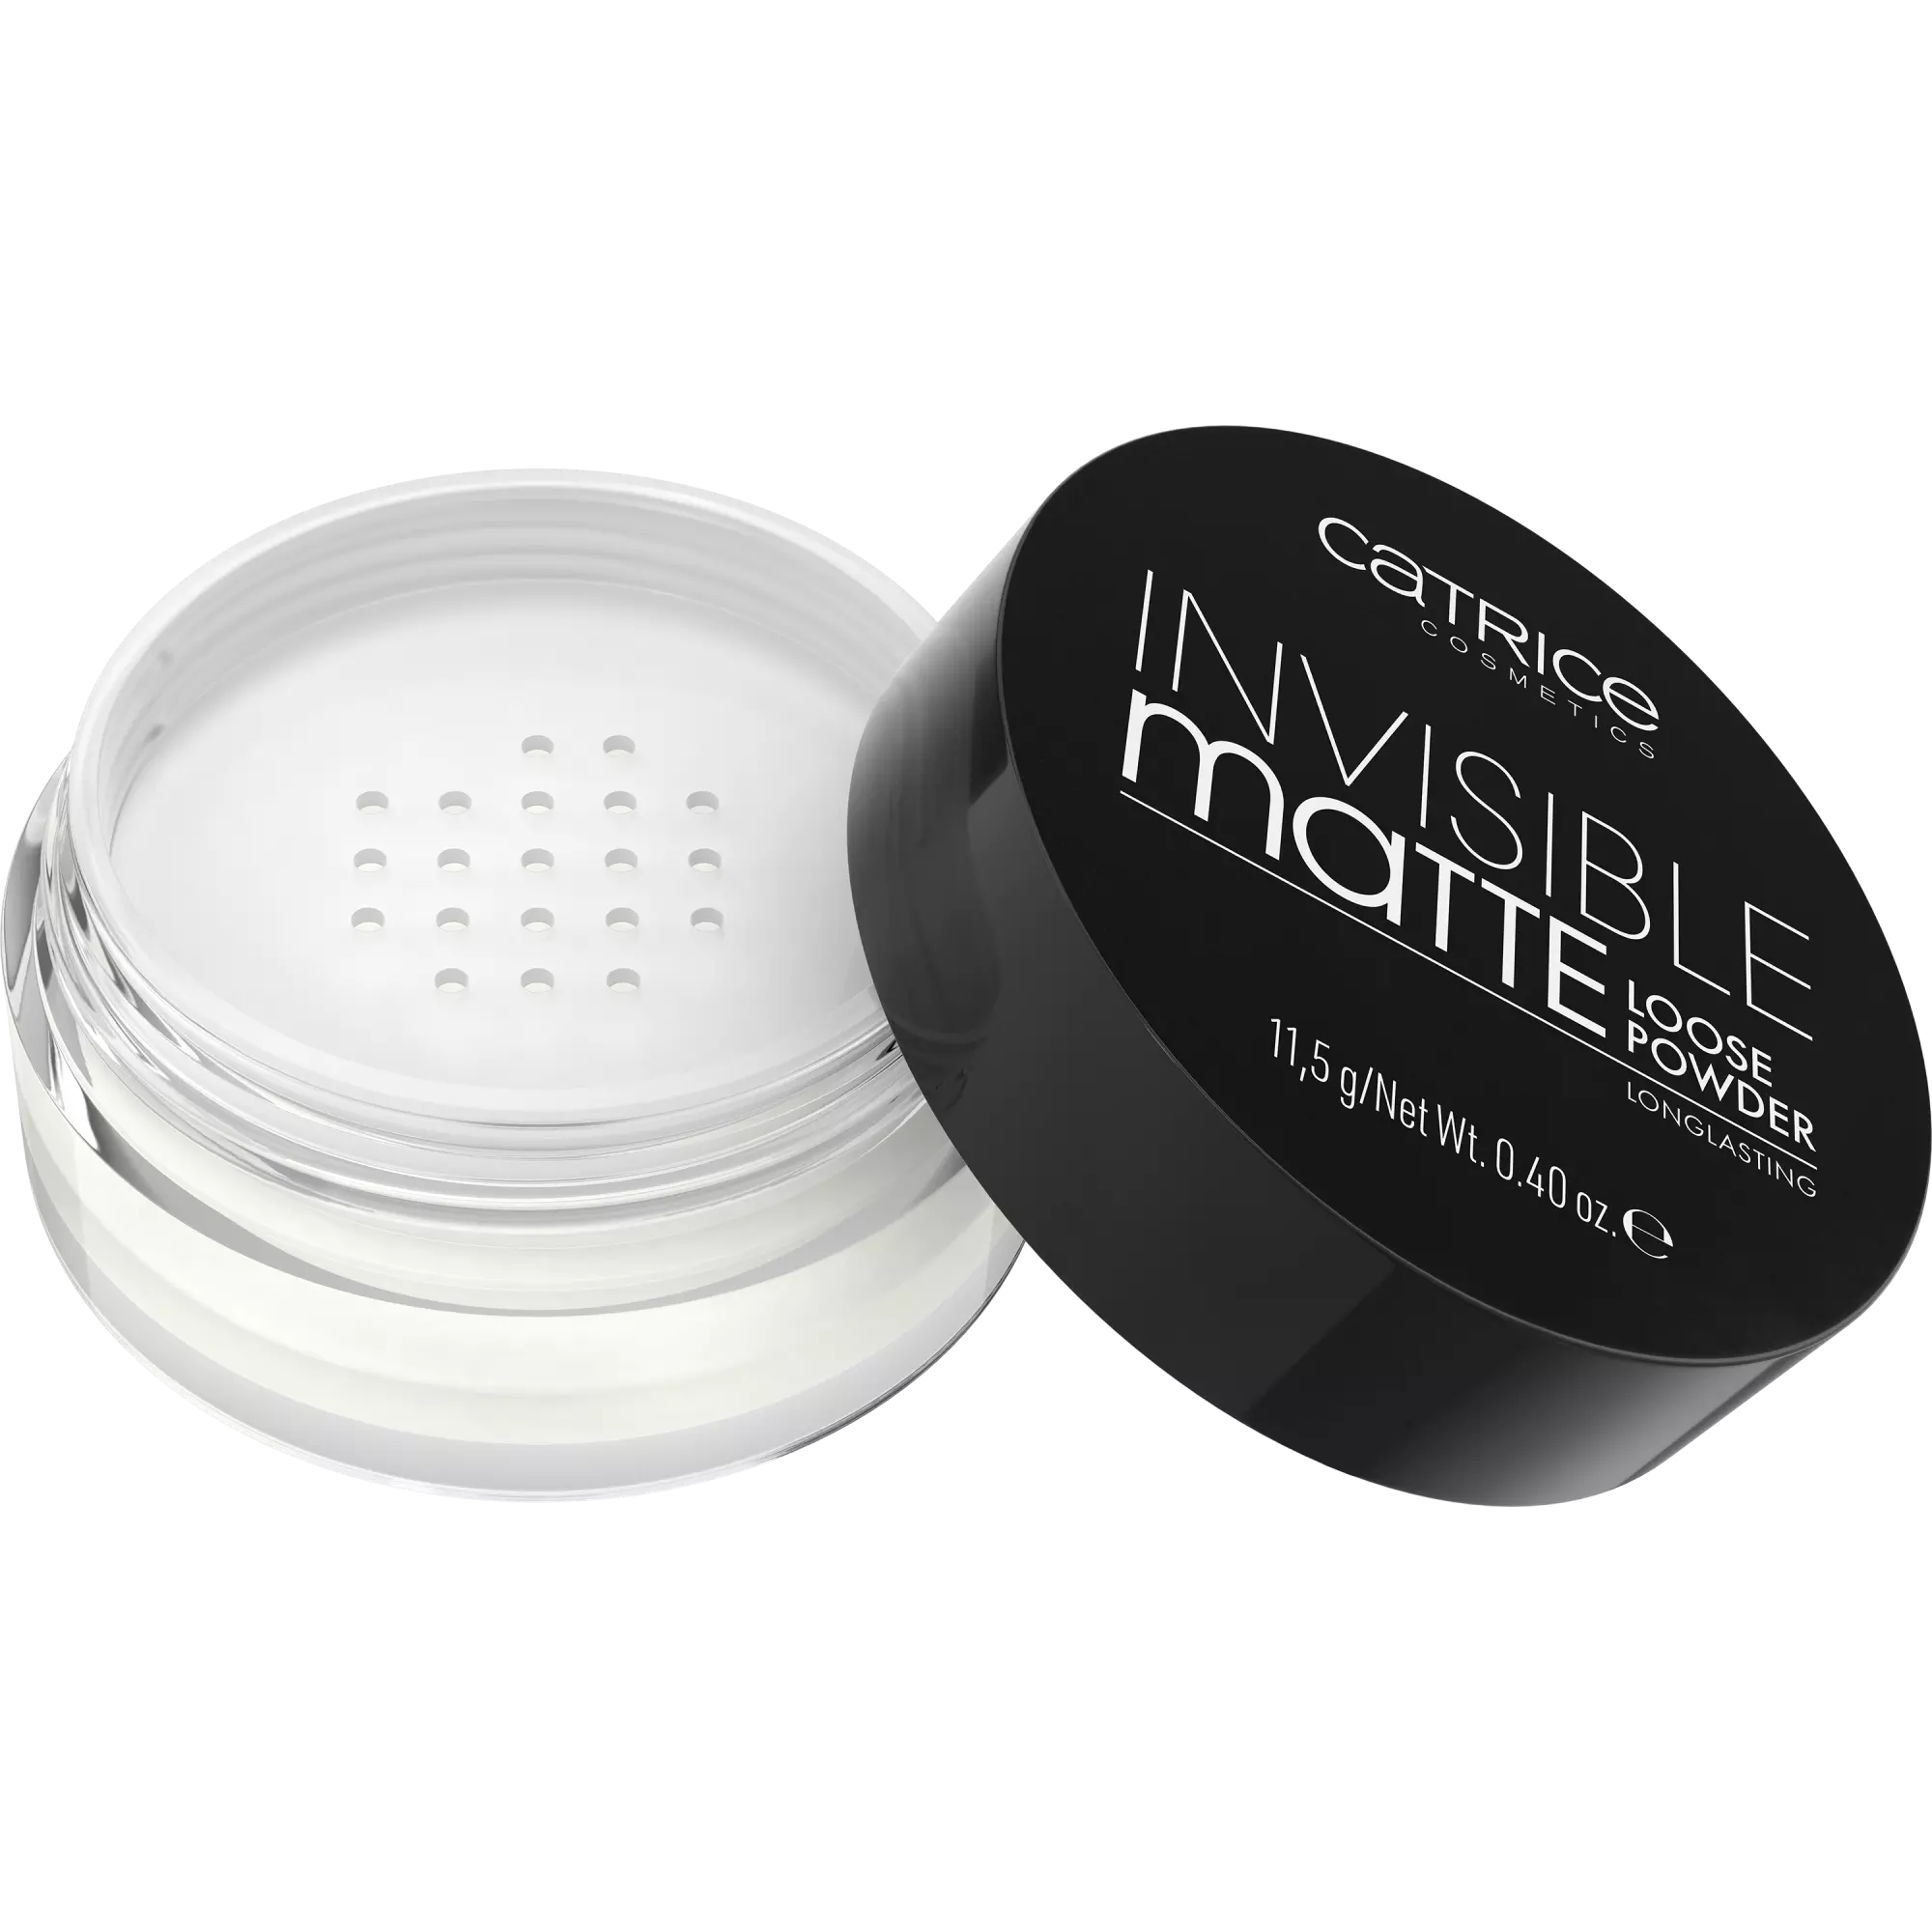 Catrice Invisible Matte Loose Powder